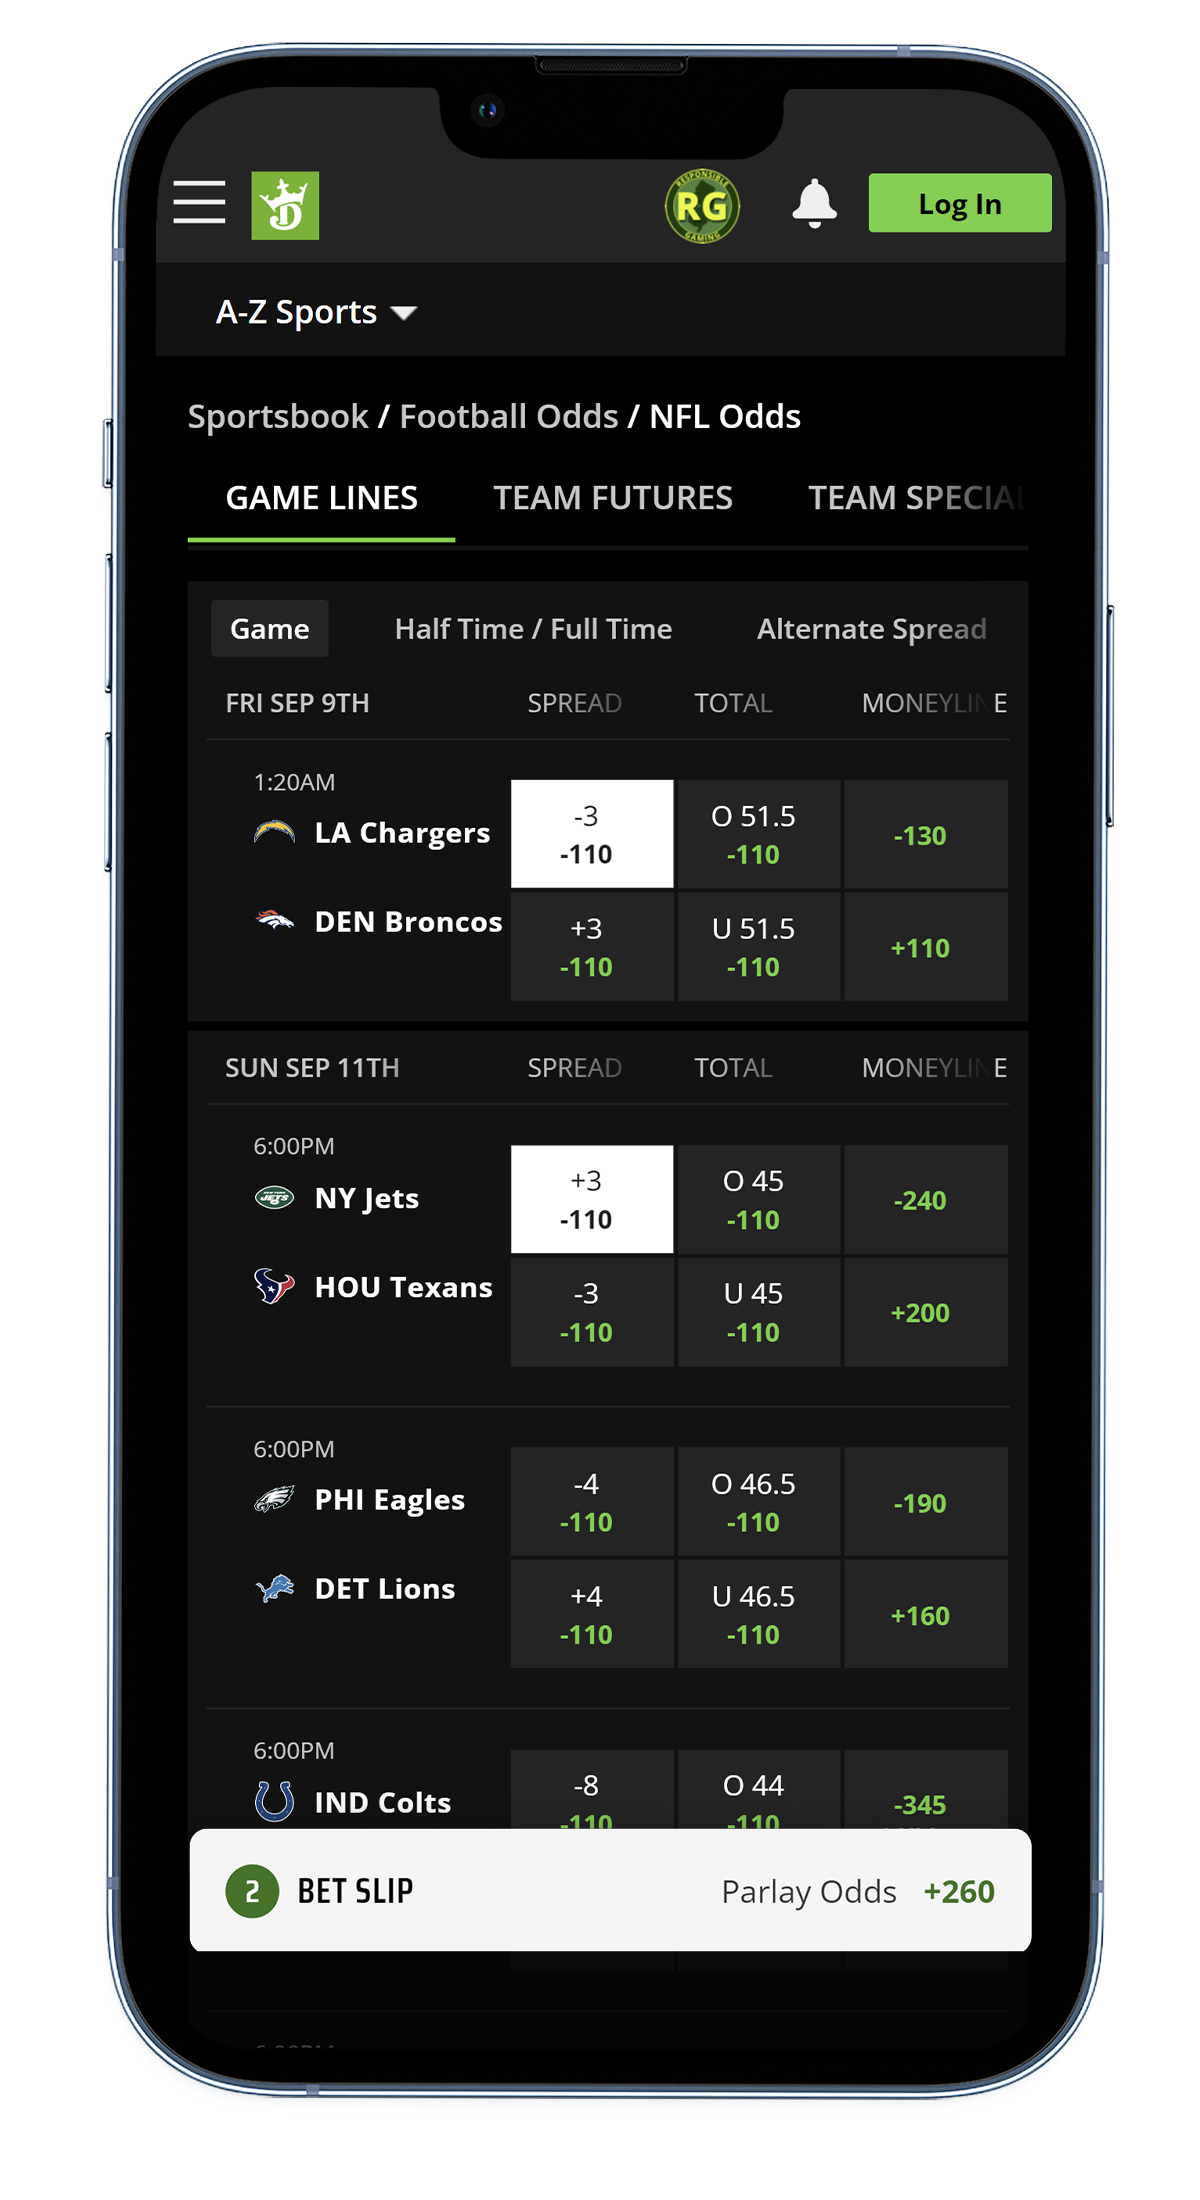 nfl sports betting parlay